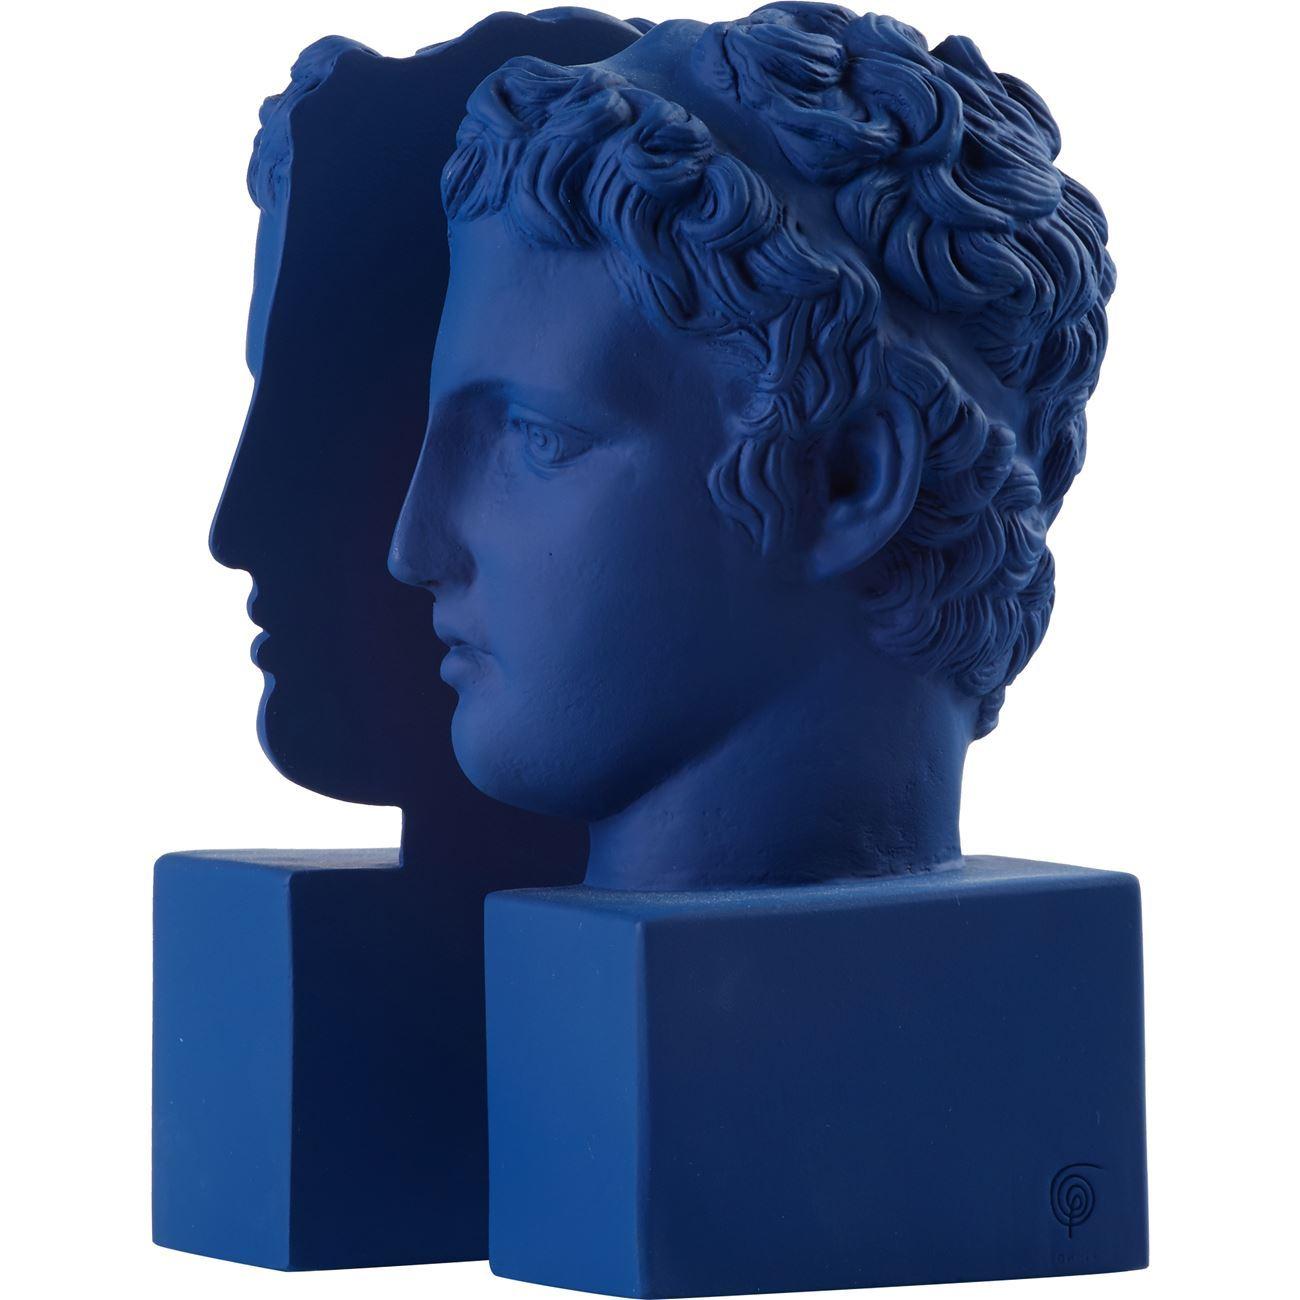 Marathon Boy Set of 2 Bookends in Blue

Made in Athens, Greece.

 